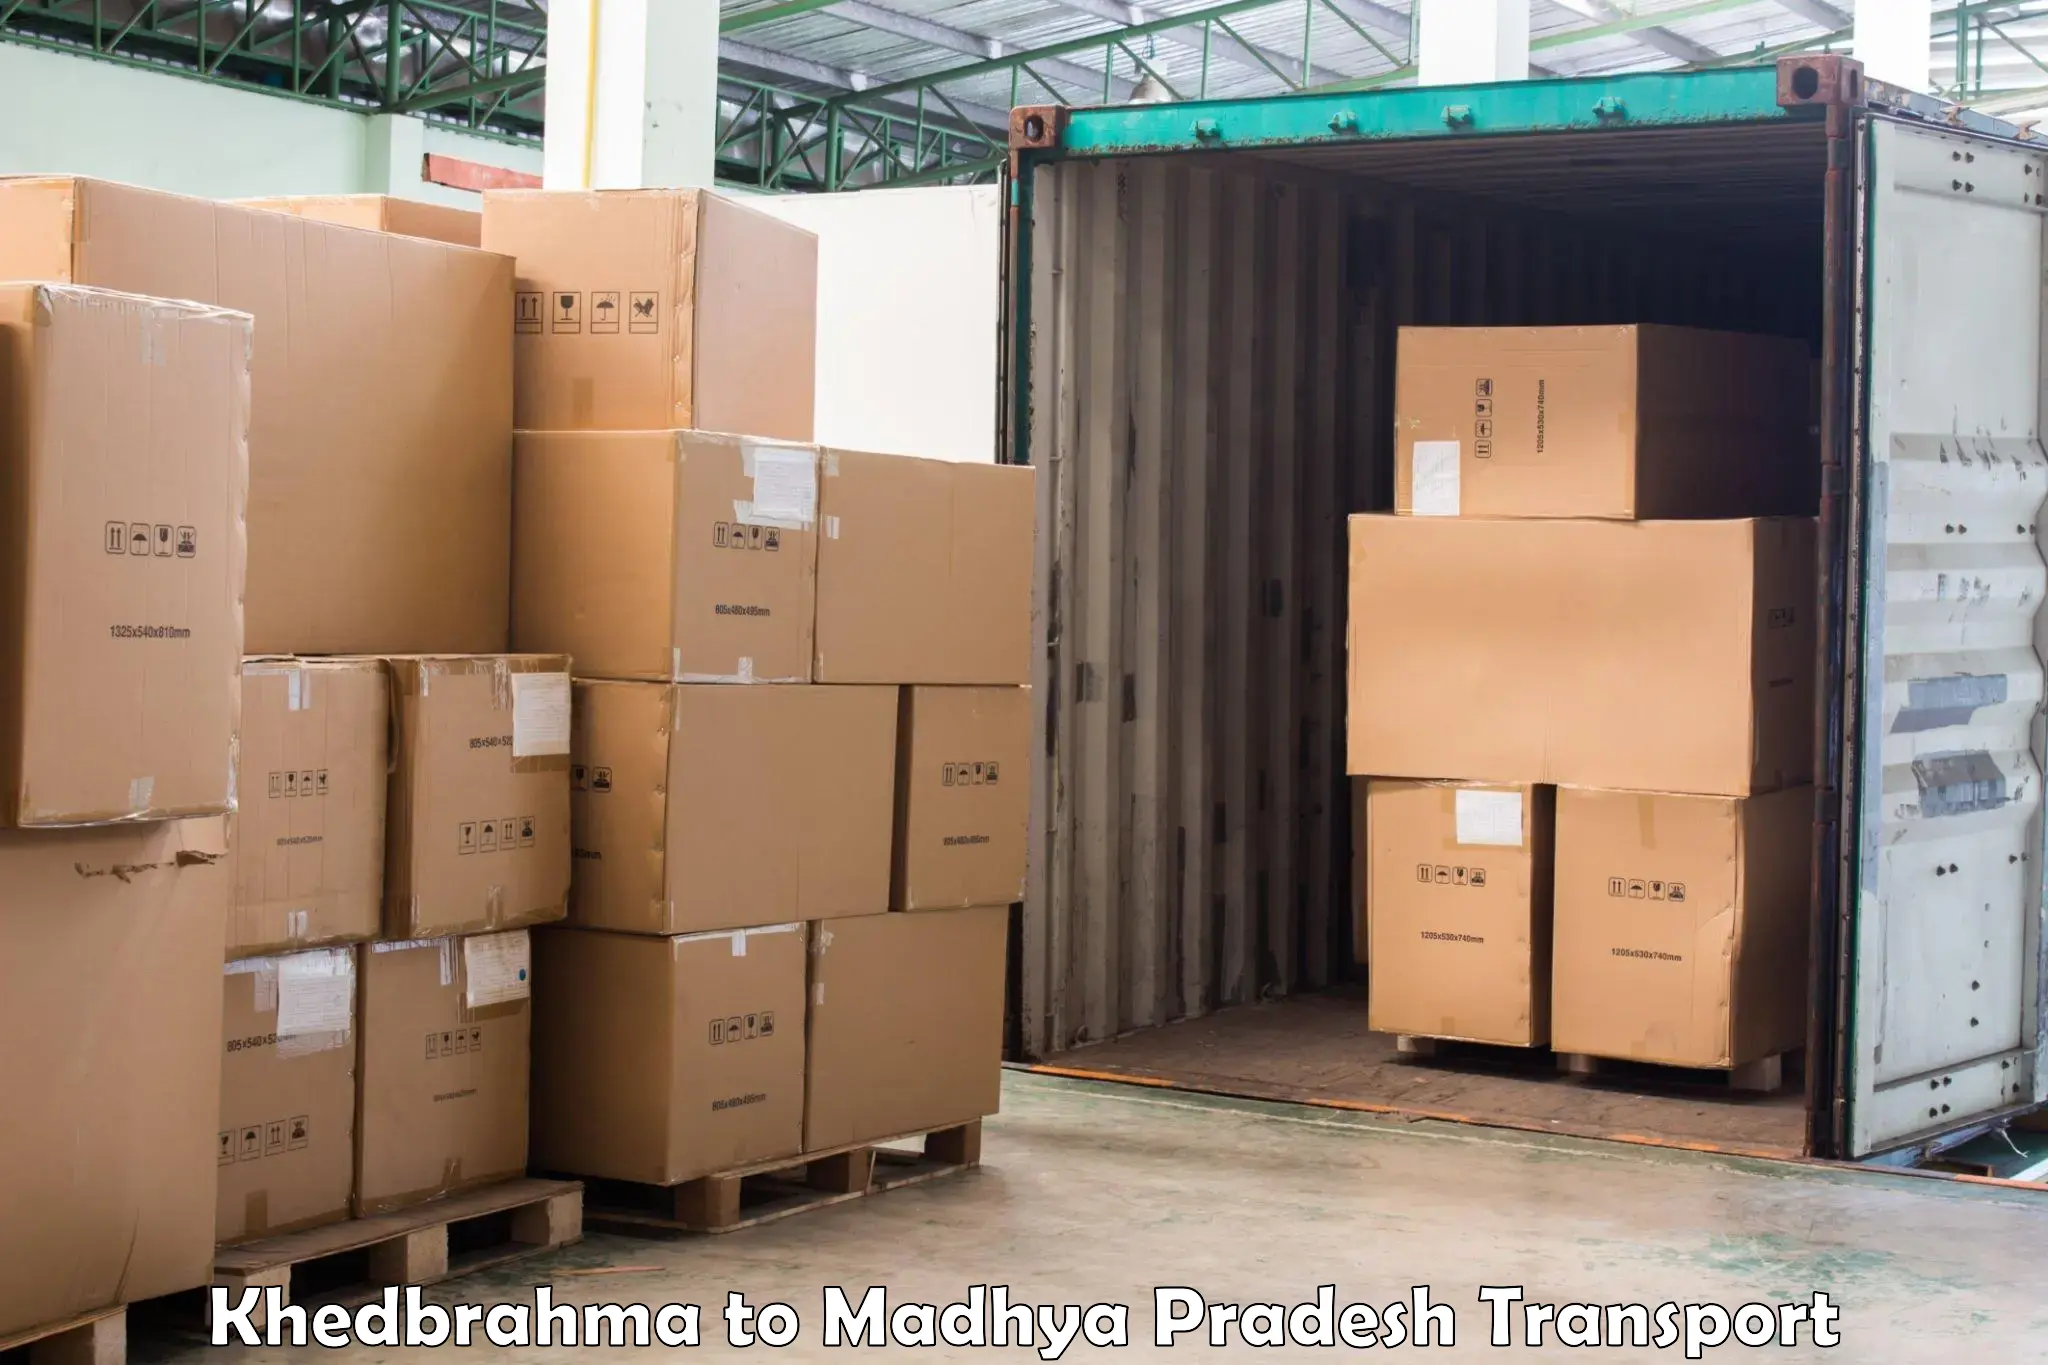 Container transport service Khedbrahma to Khandwa